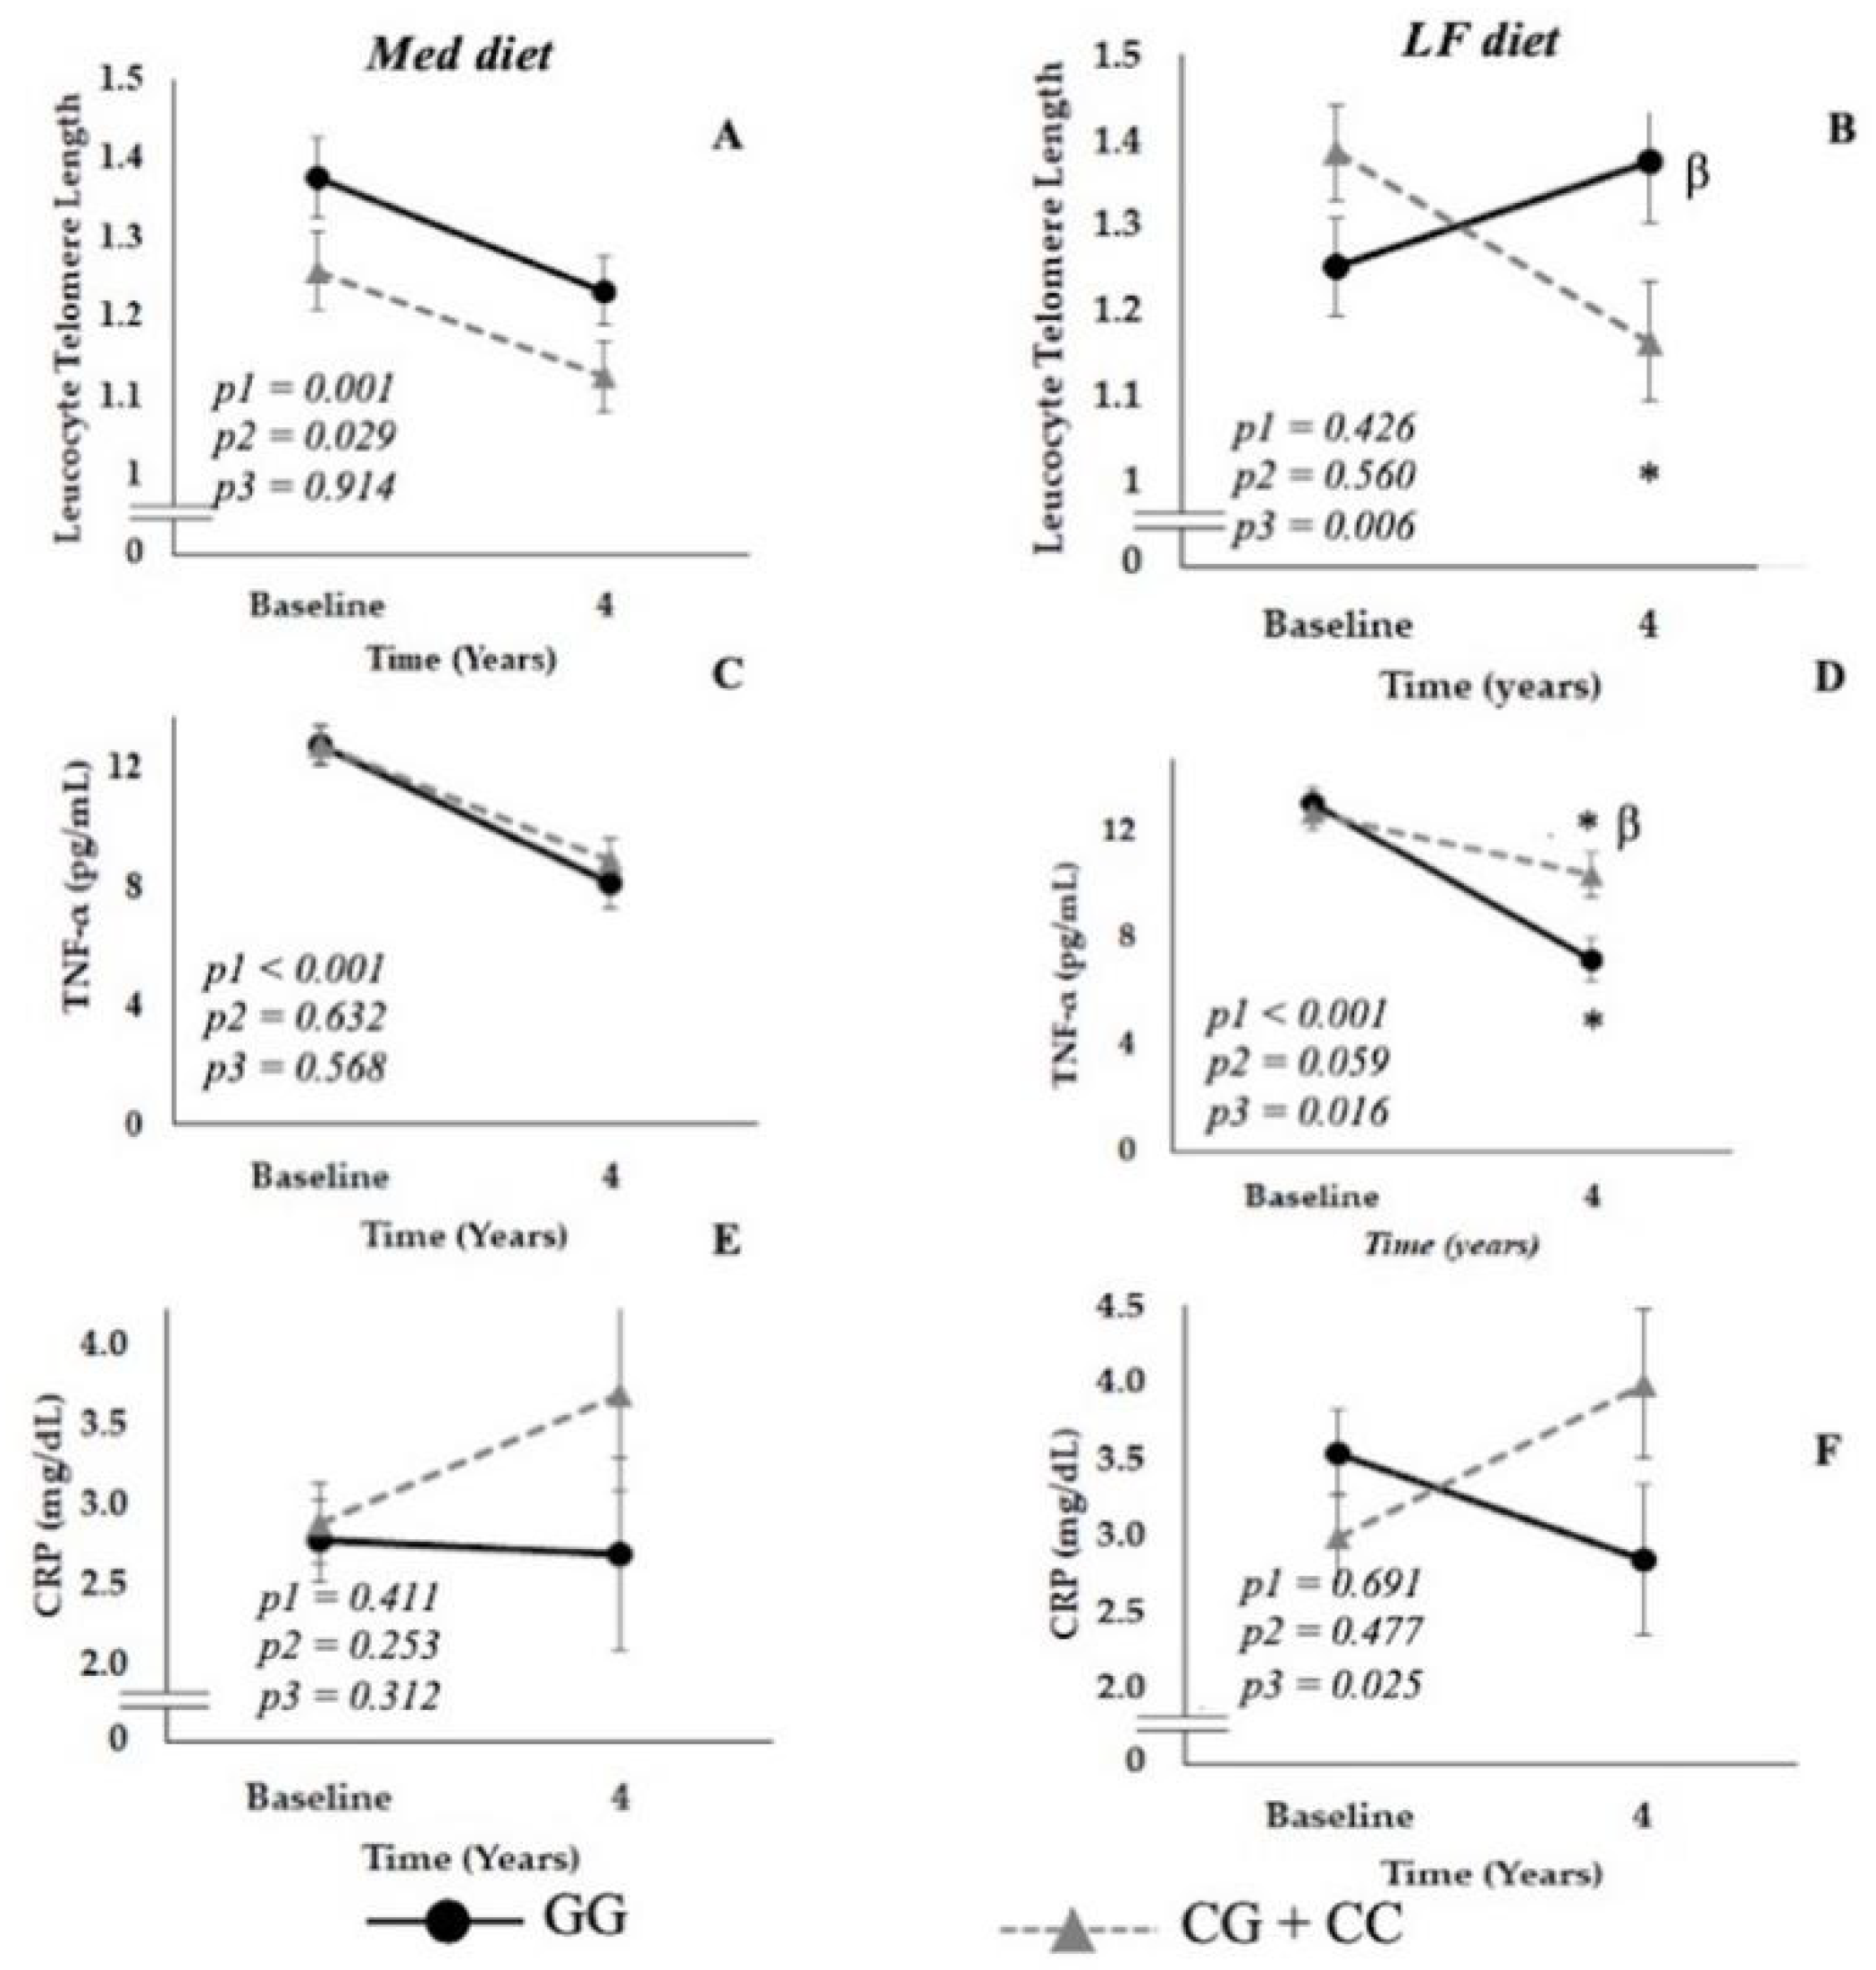 Nutrients | Free Full-Text | Diet and SIRT1 Genotype Interact to Modulate  Aging-Related Processes in Patients with Coronary Heart Disease: From the  CORDIOPREV Study